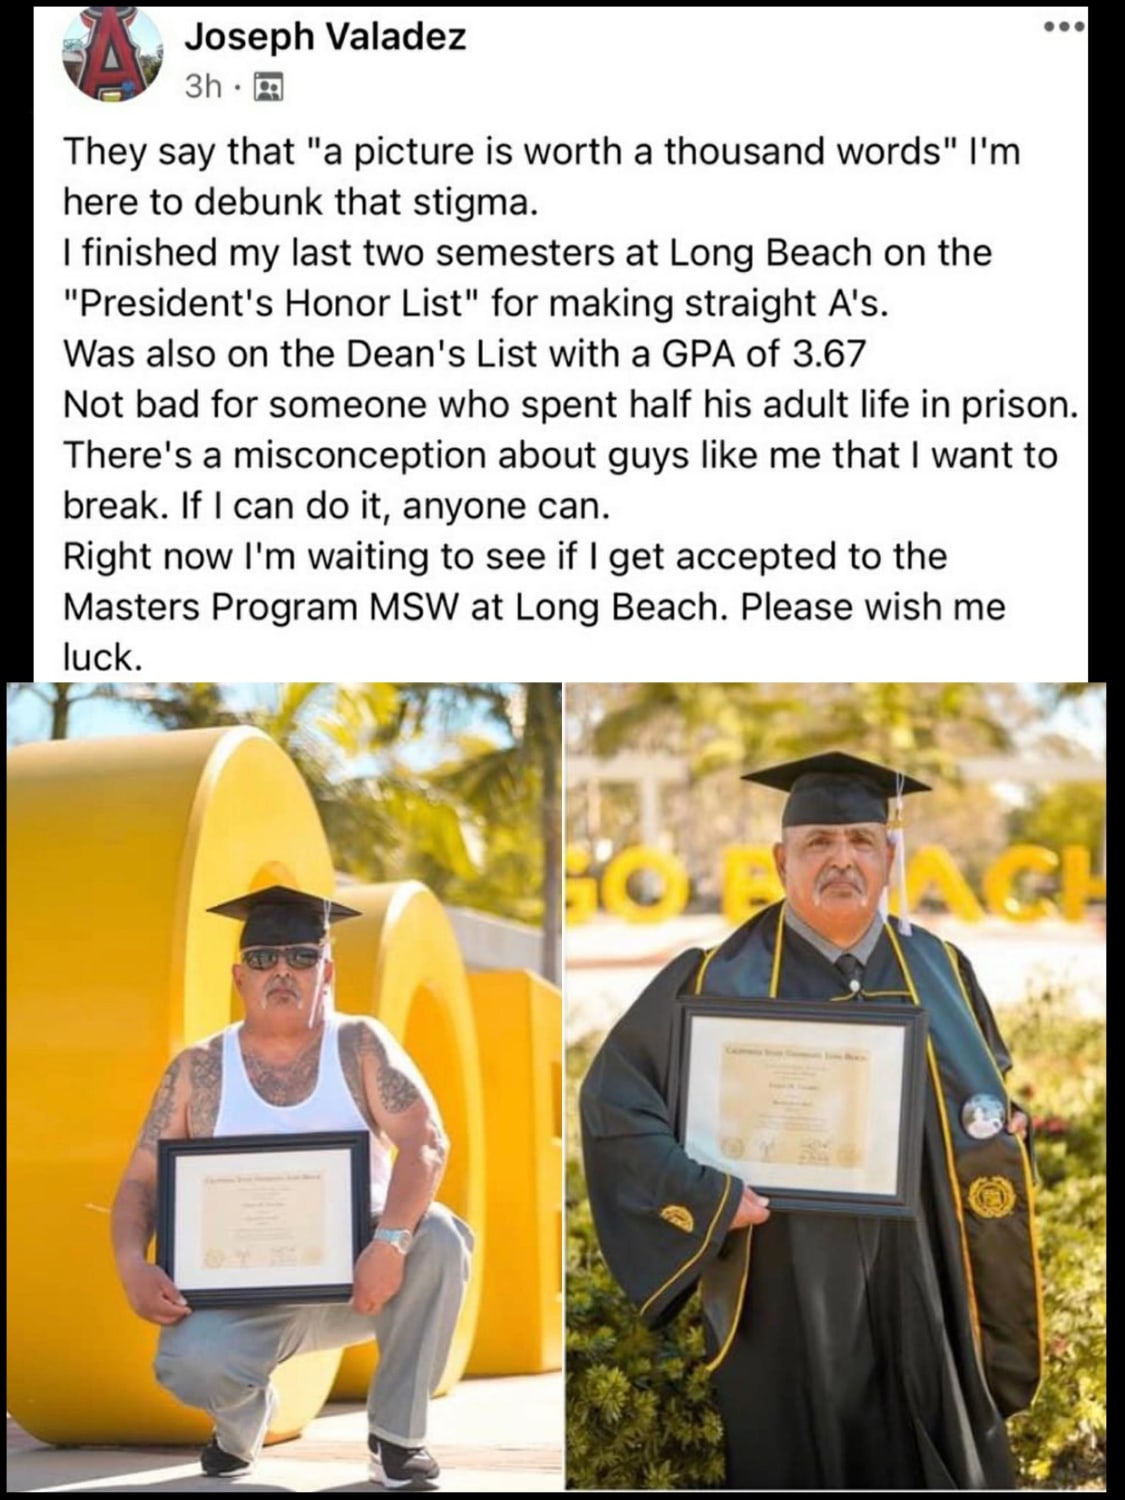 Meet Joseph Valadez. He spent 43 years as a gang member, 38 years as a heroin addict, and over 20 years in prison. At the age of 62, he decided to turn his life around and graduated from CSULB with honors. He has now applied to graduate school to pursue his Masters degree.